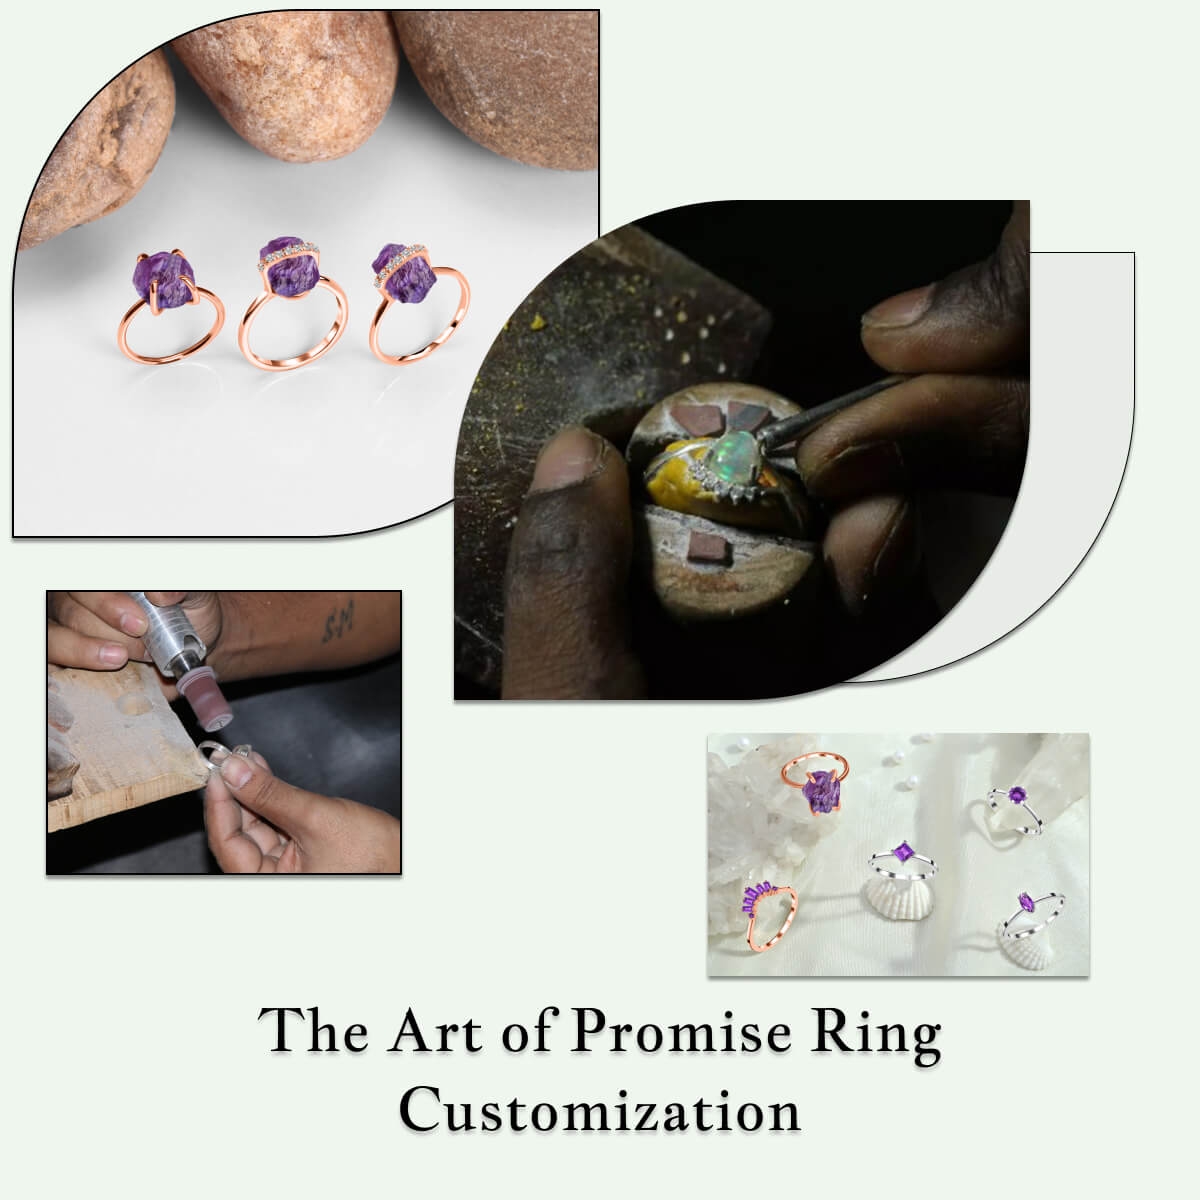 What Is Promise Ring and How to Customize It?